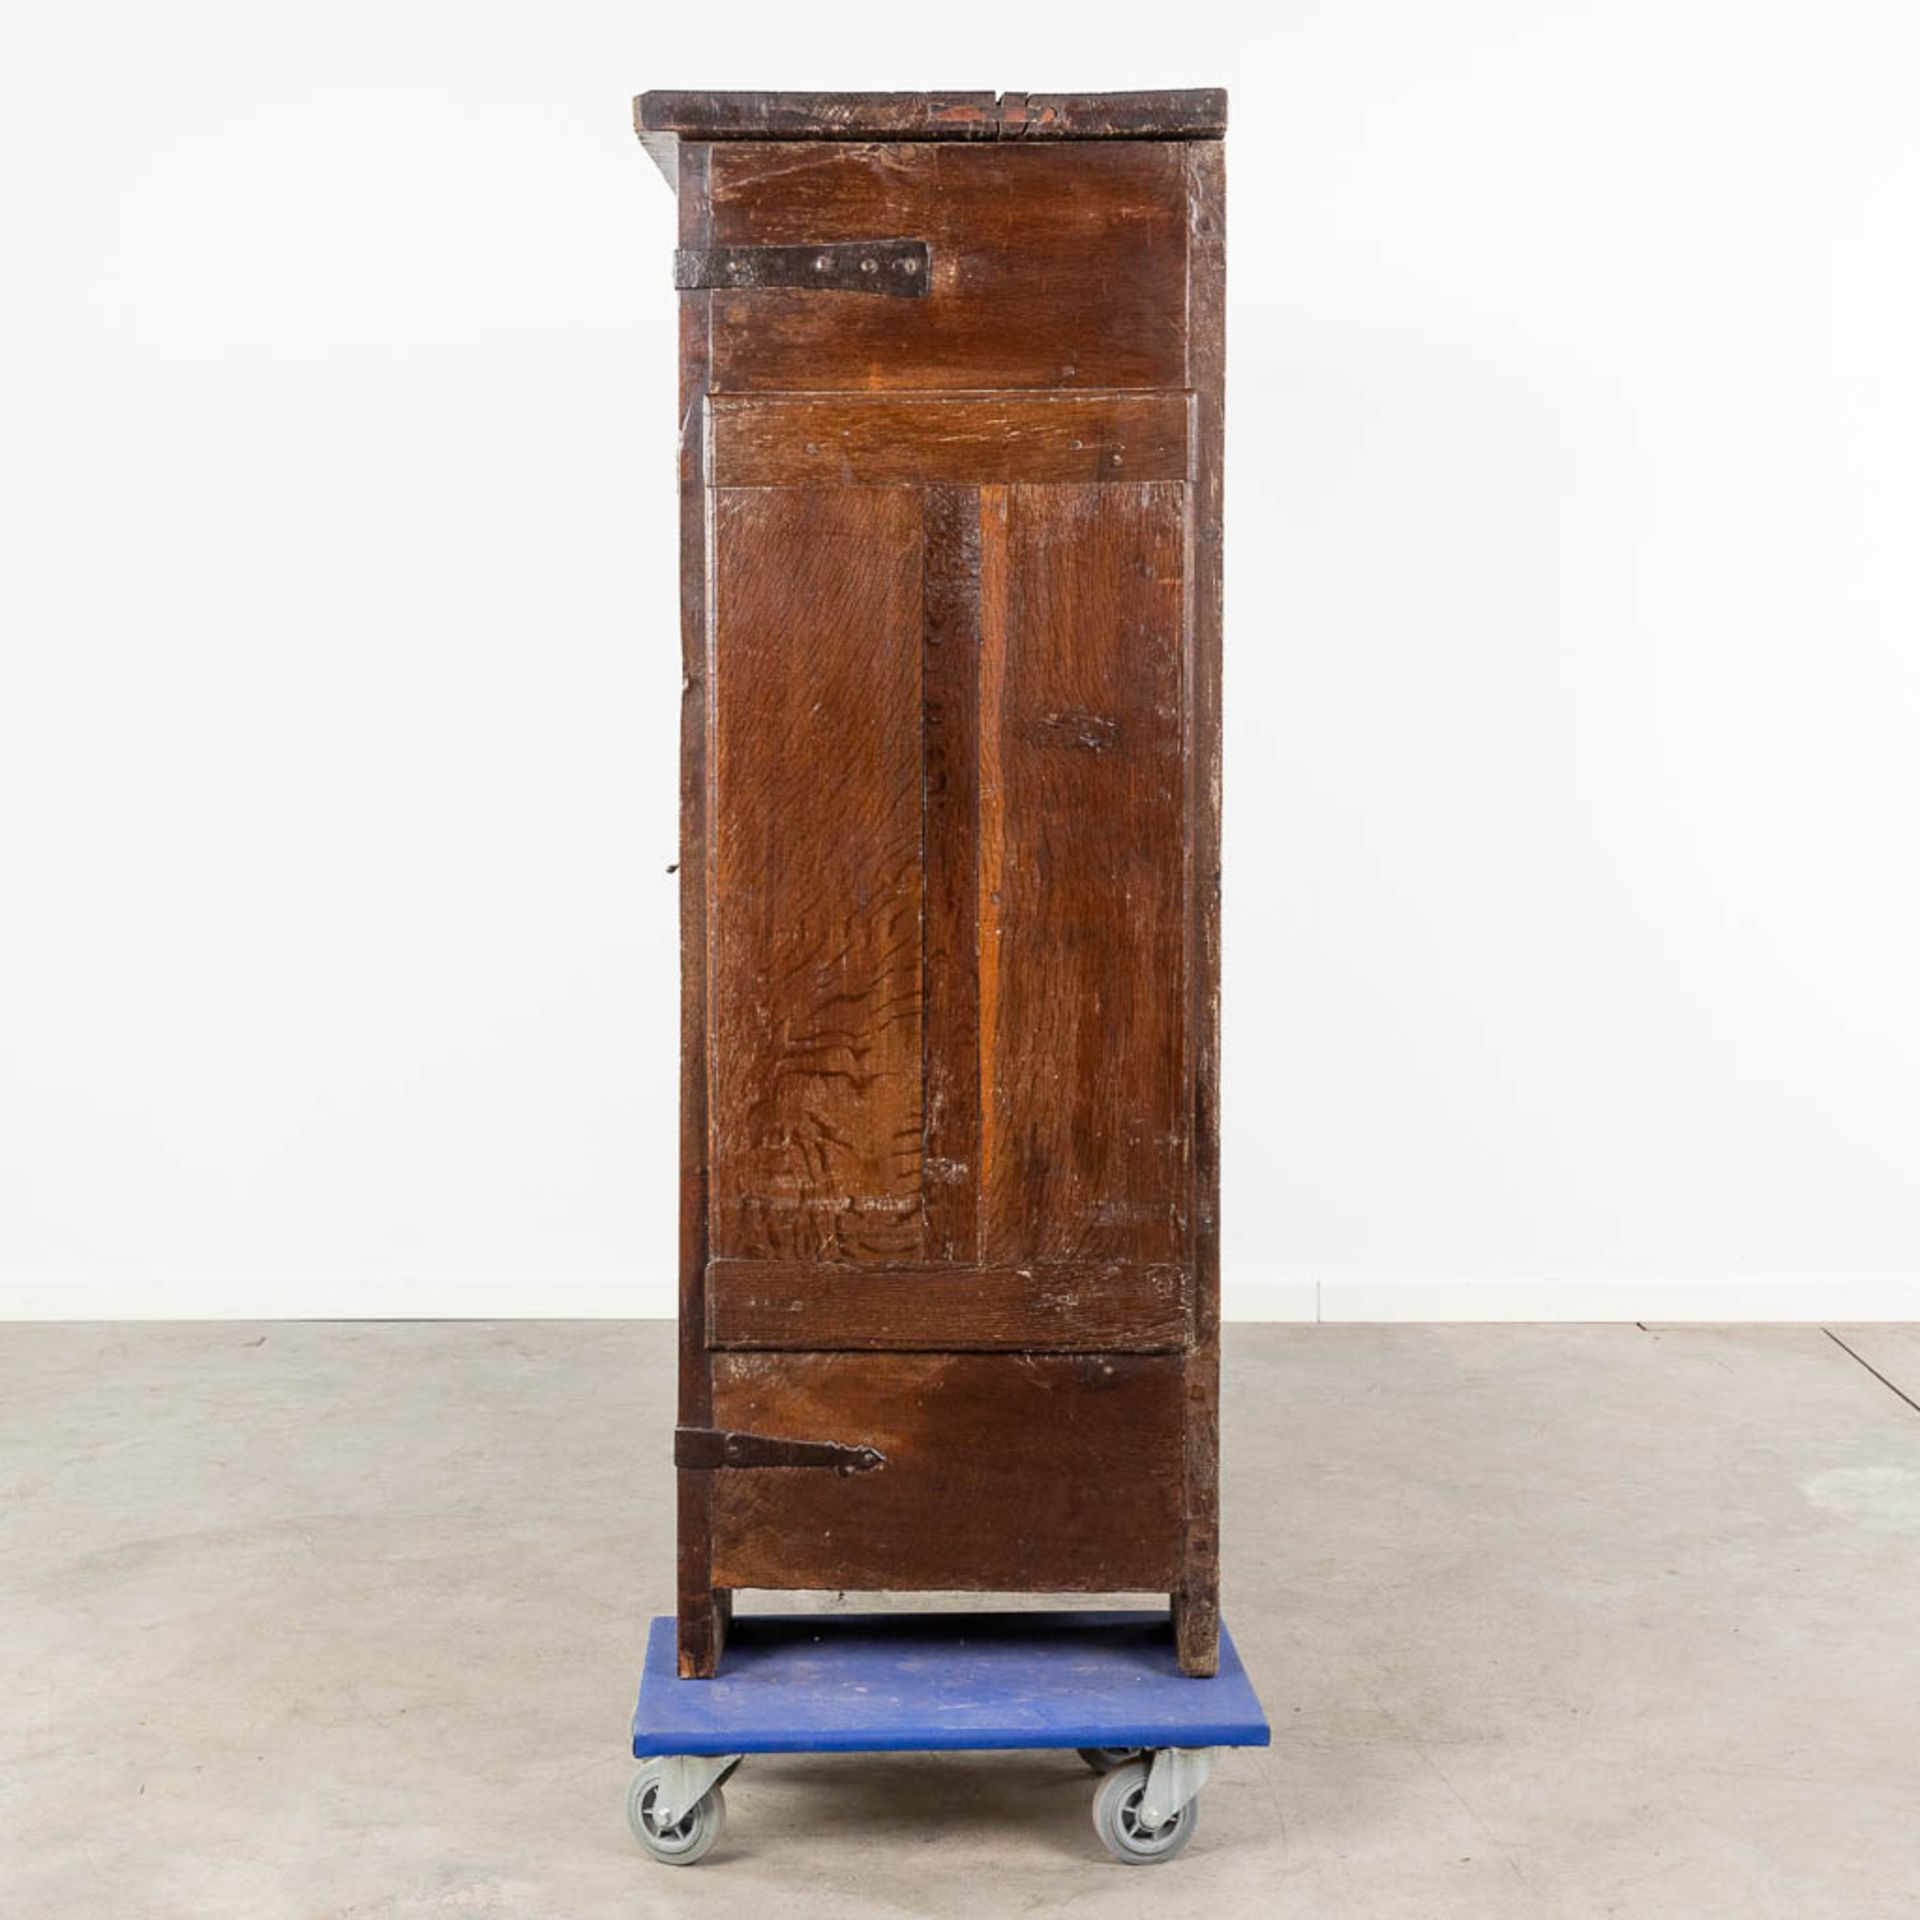 An antique three-door cabinet with sculptured oak doors, France, 17th C. (L: 55 x W: 175 x H: 151 cm - Image 8 of 23